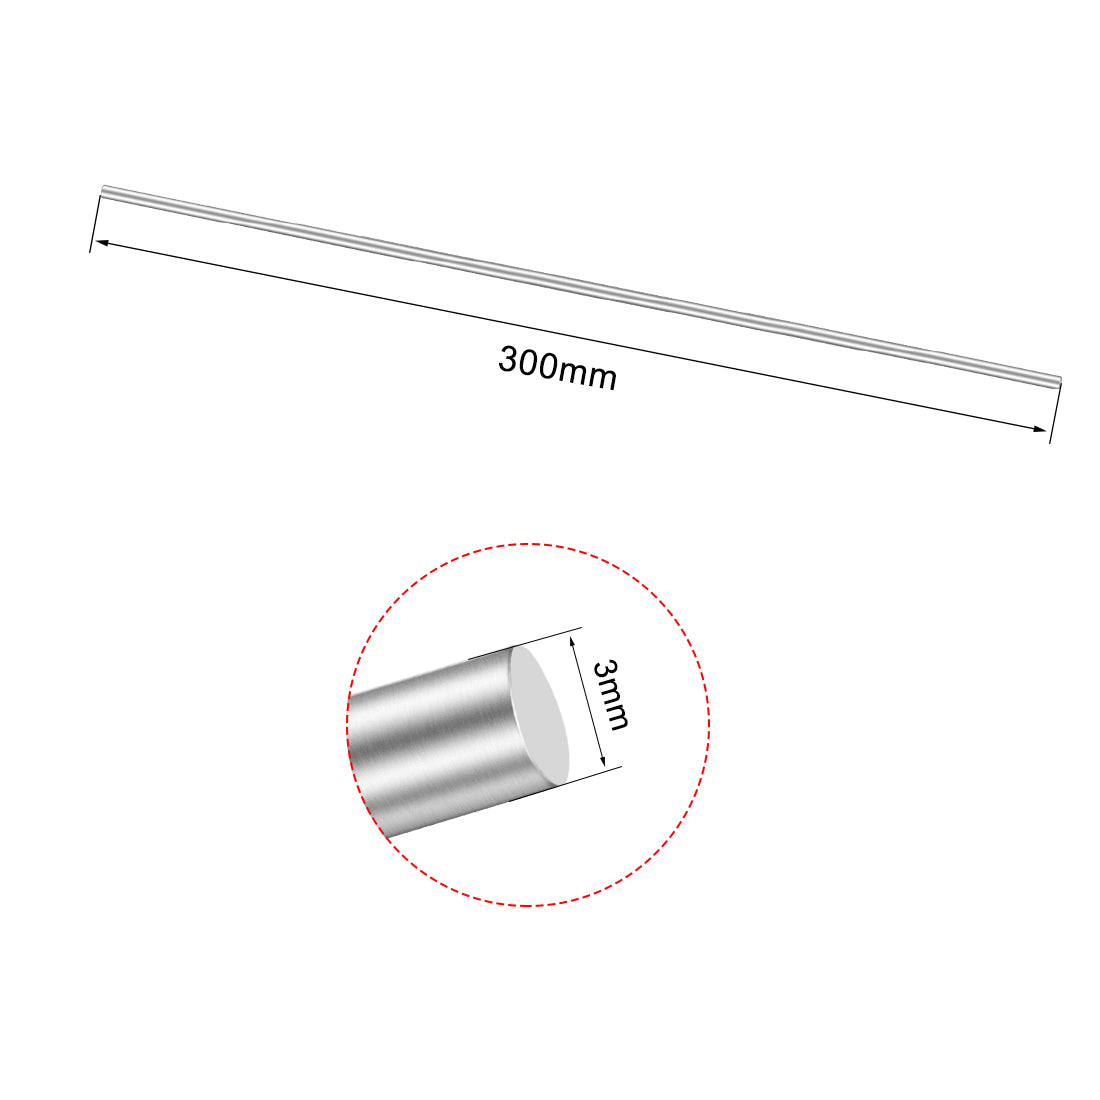 uxcell Uxcell 2Pcs Stainless Steel Shaft Round Rod 300mmx3mm for DIY Toy RC Car Model Part